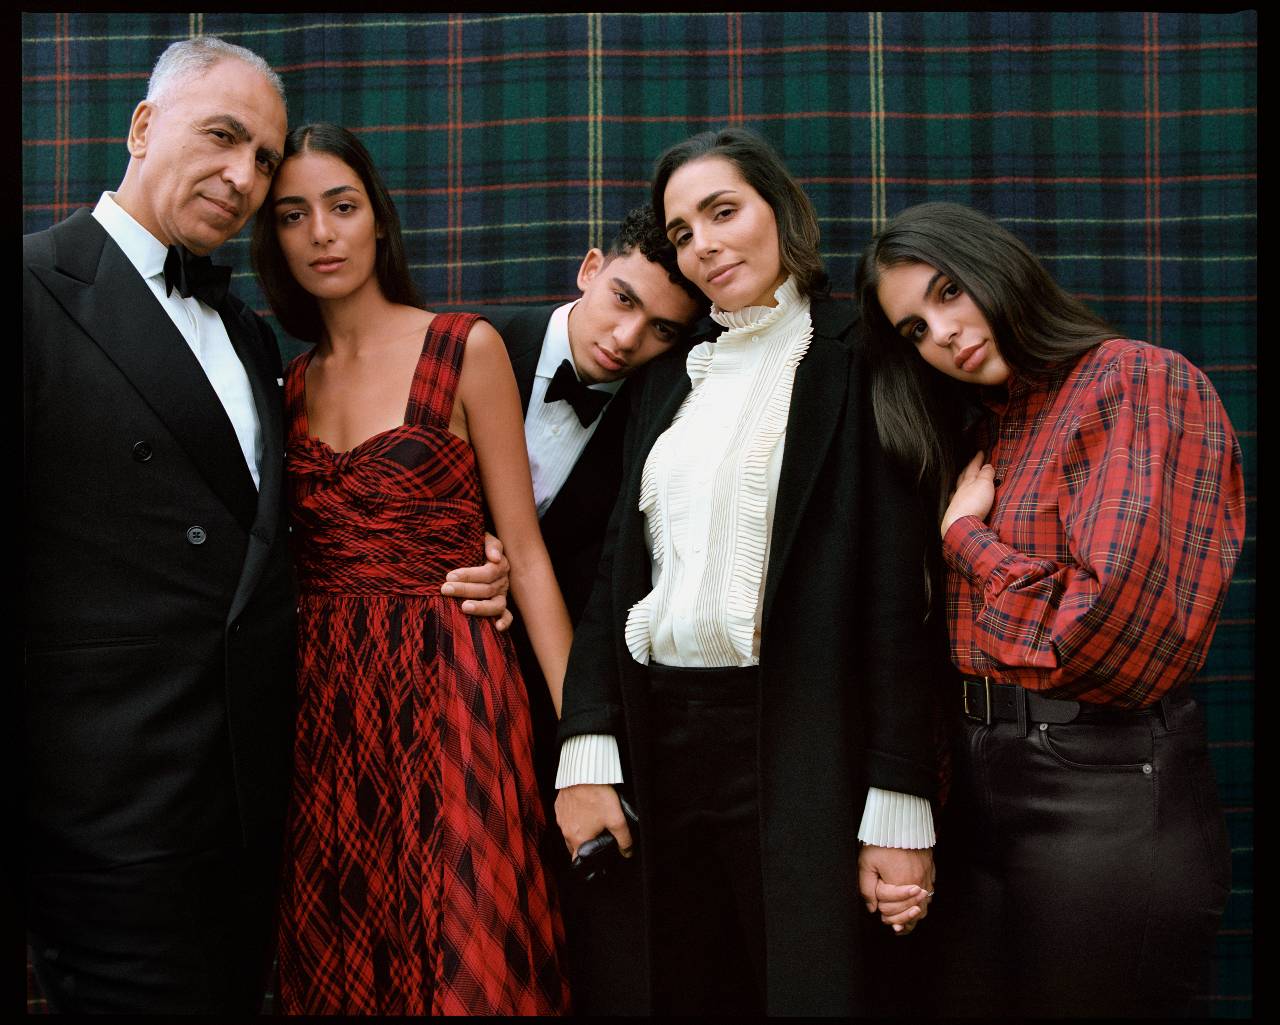 Partnership: Ralph Lauren's New Holiday Collection